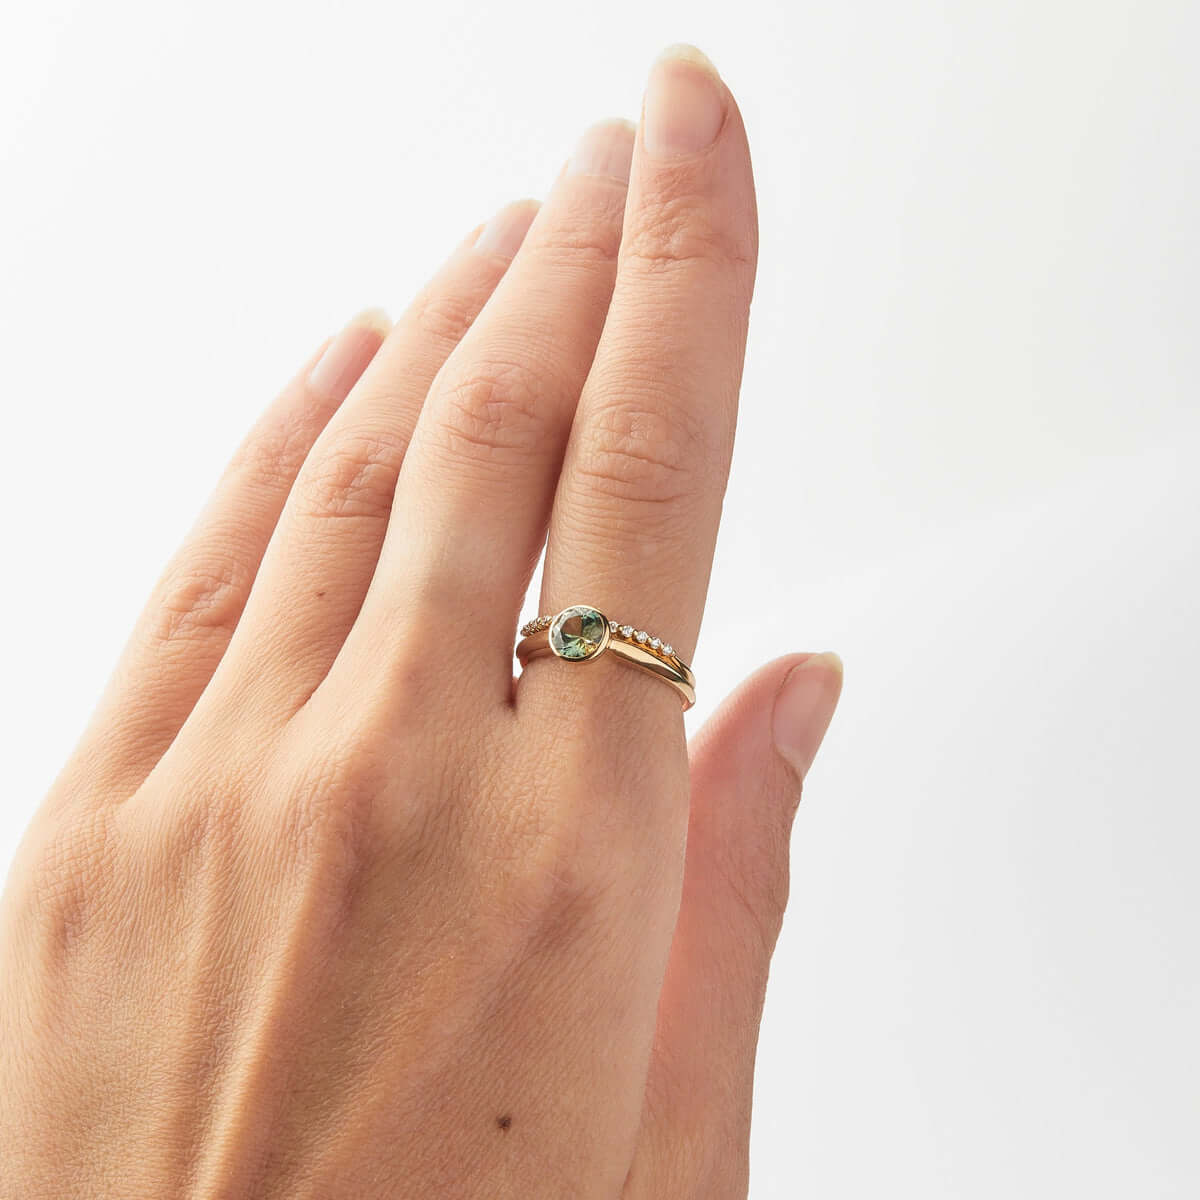 A hand model displaying a gold ring with a bezel-set, round-cut Australian sapphire, paired with a diamond gold band.